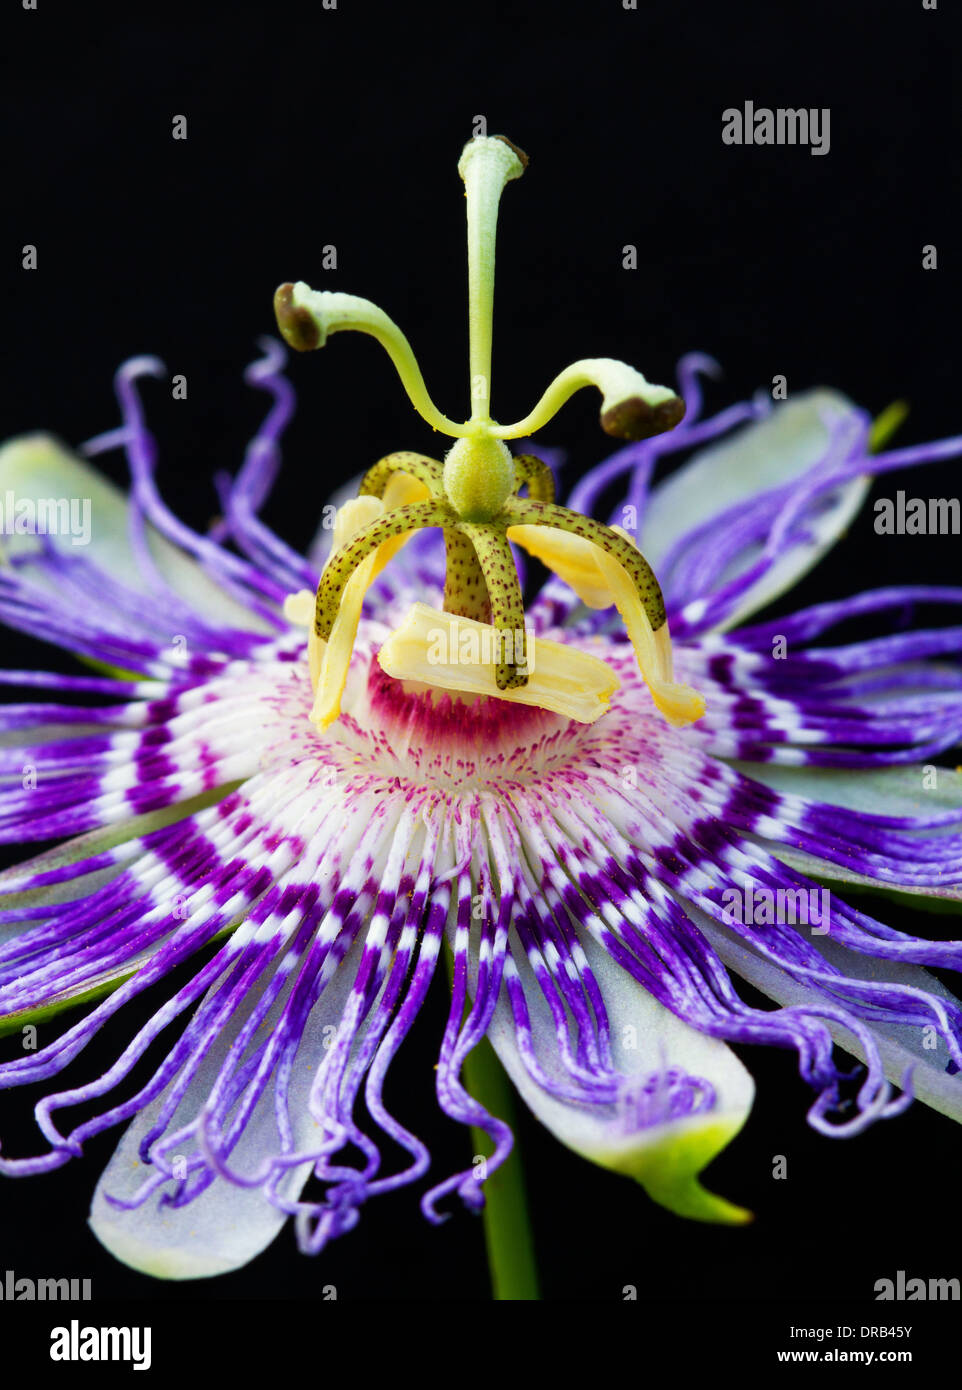 A close-up macro view of a passion flower (Passiflora Incarnata) set against a black background. Stock Photo